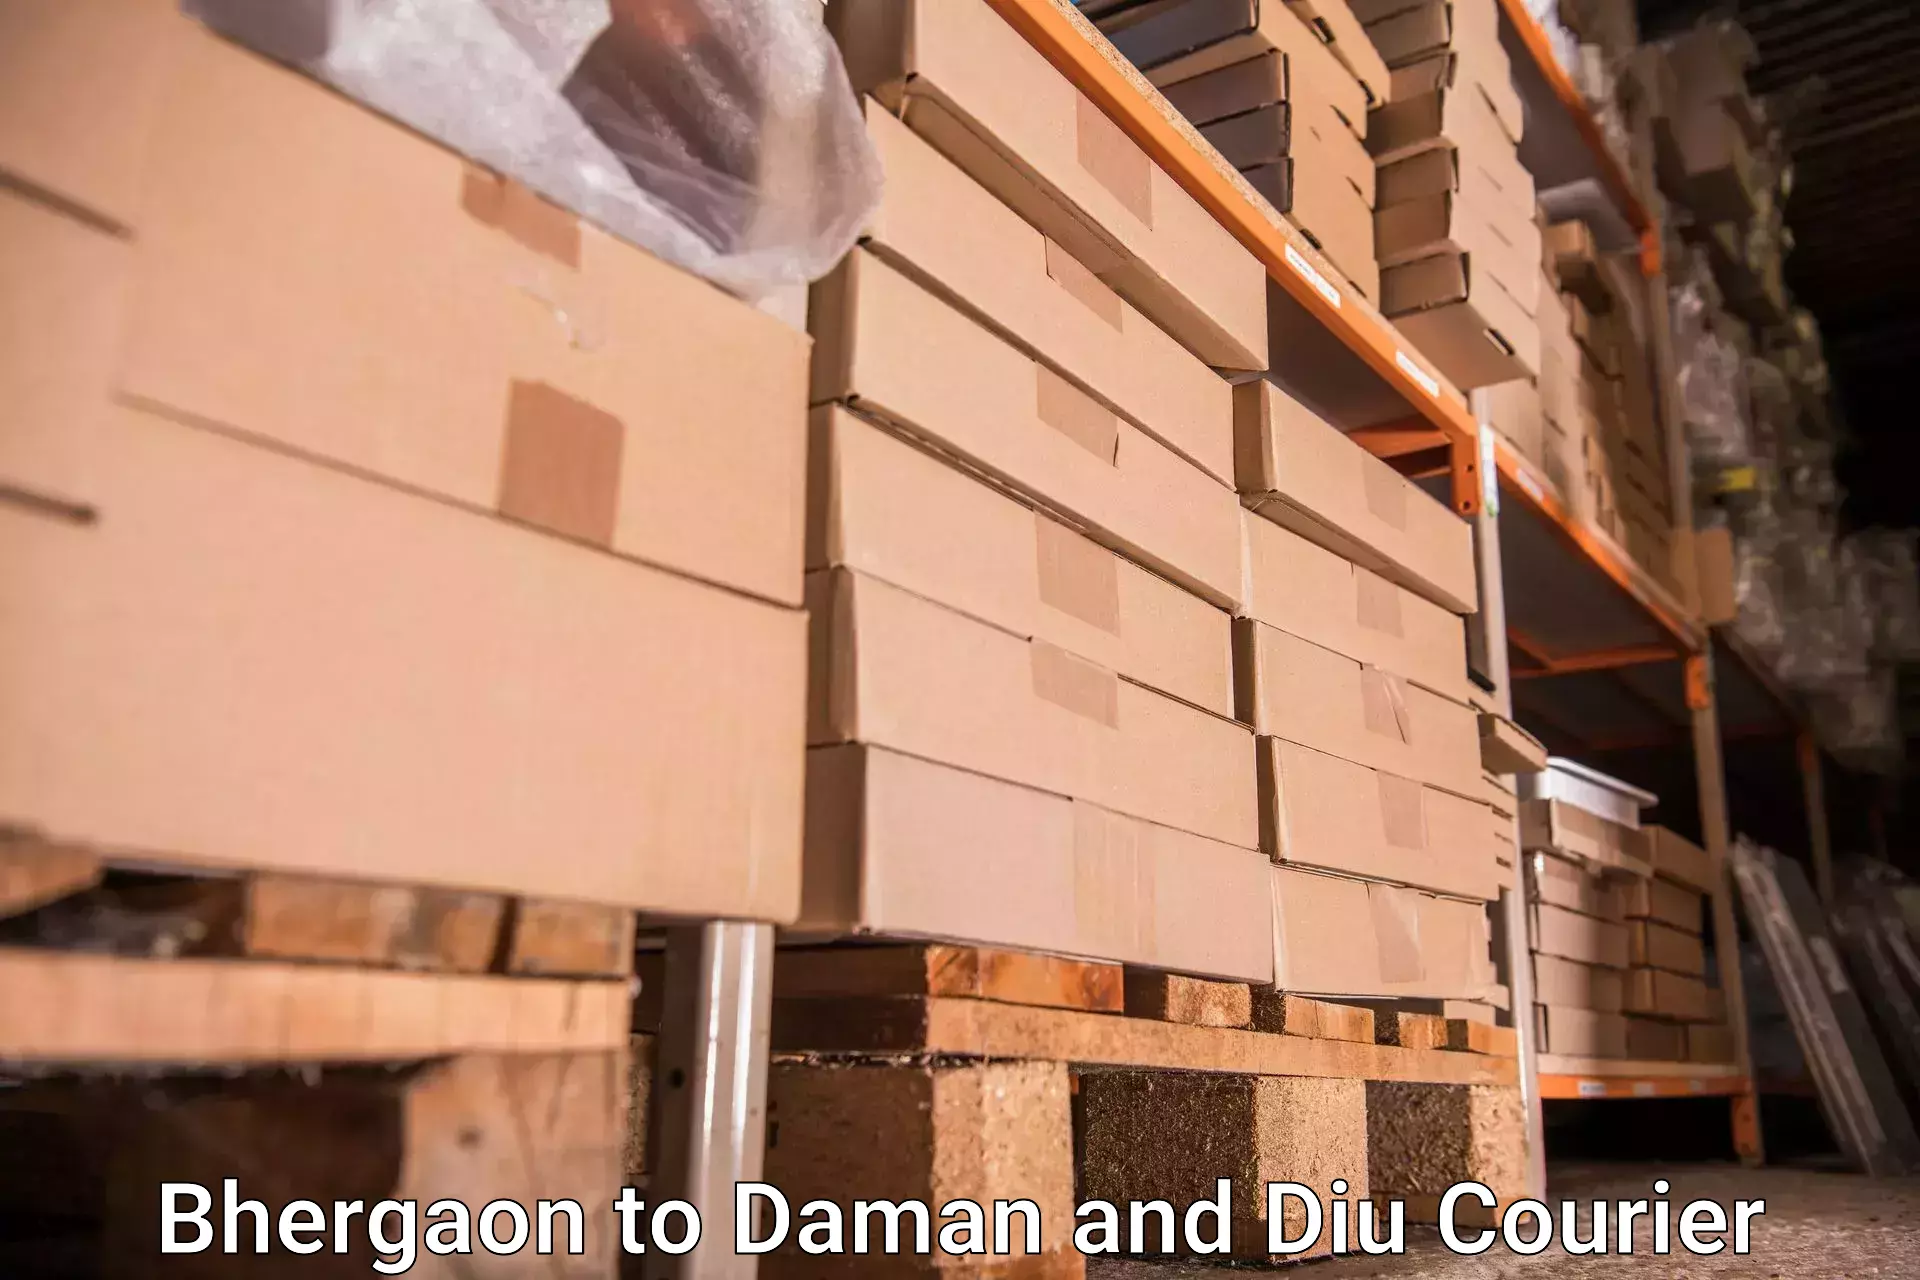 Luggage delivery network Bhergaon to Daman and Diu